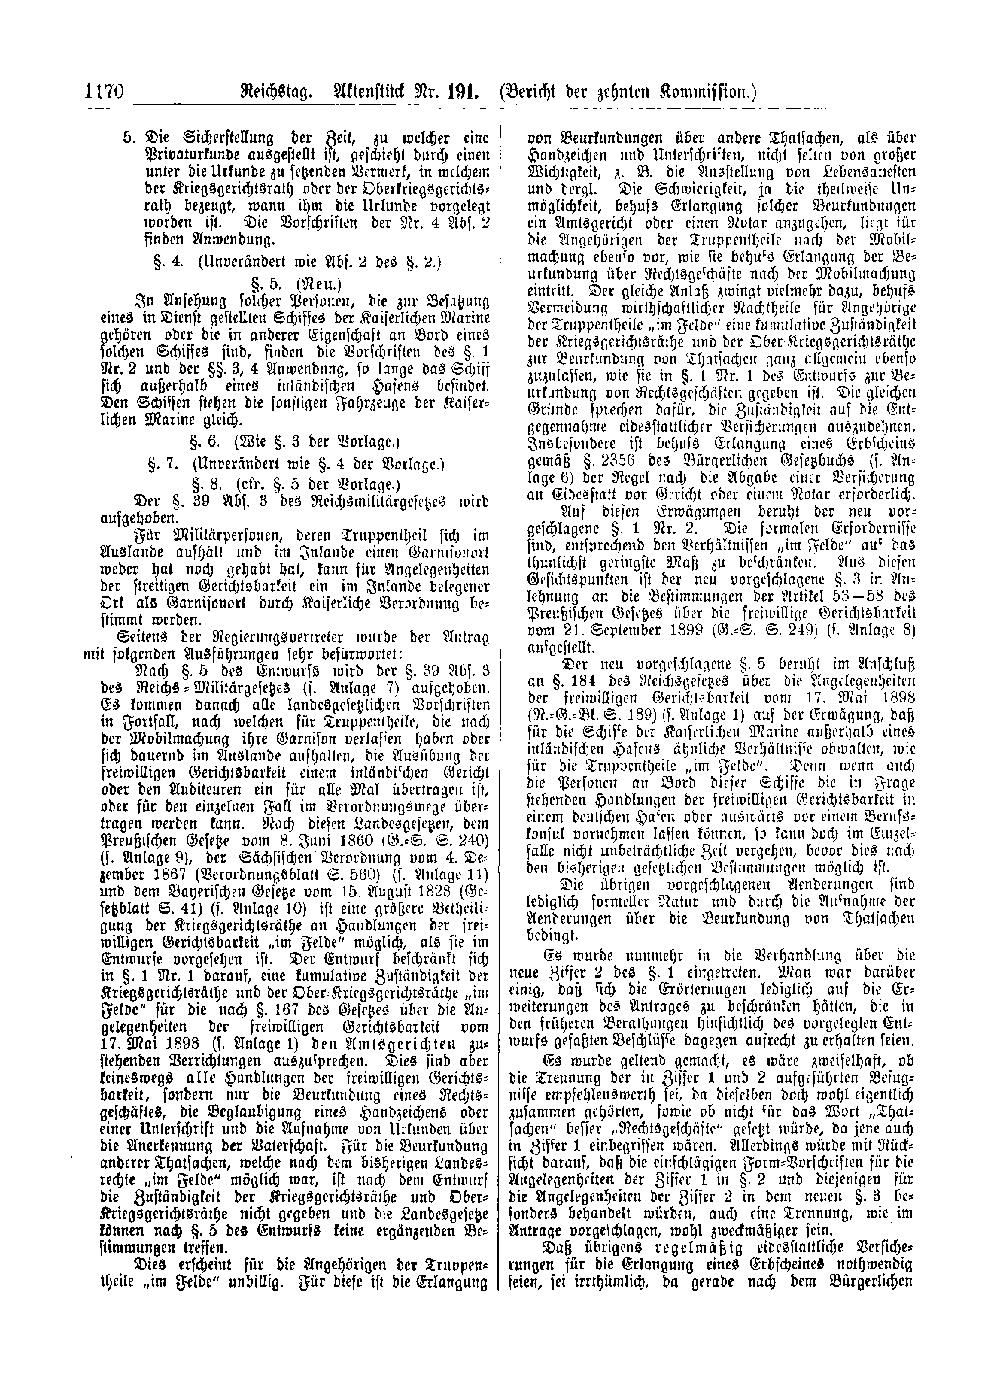 Scan of page 1170